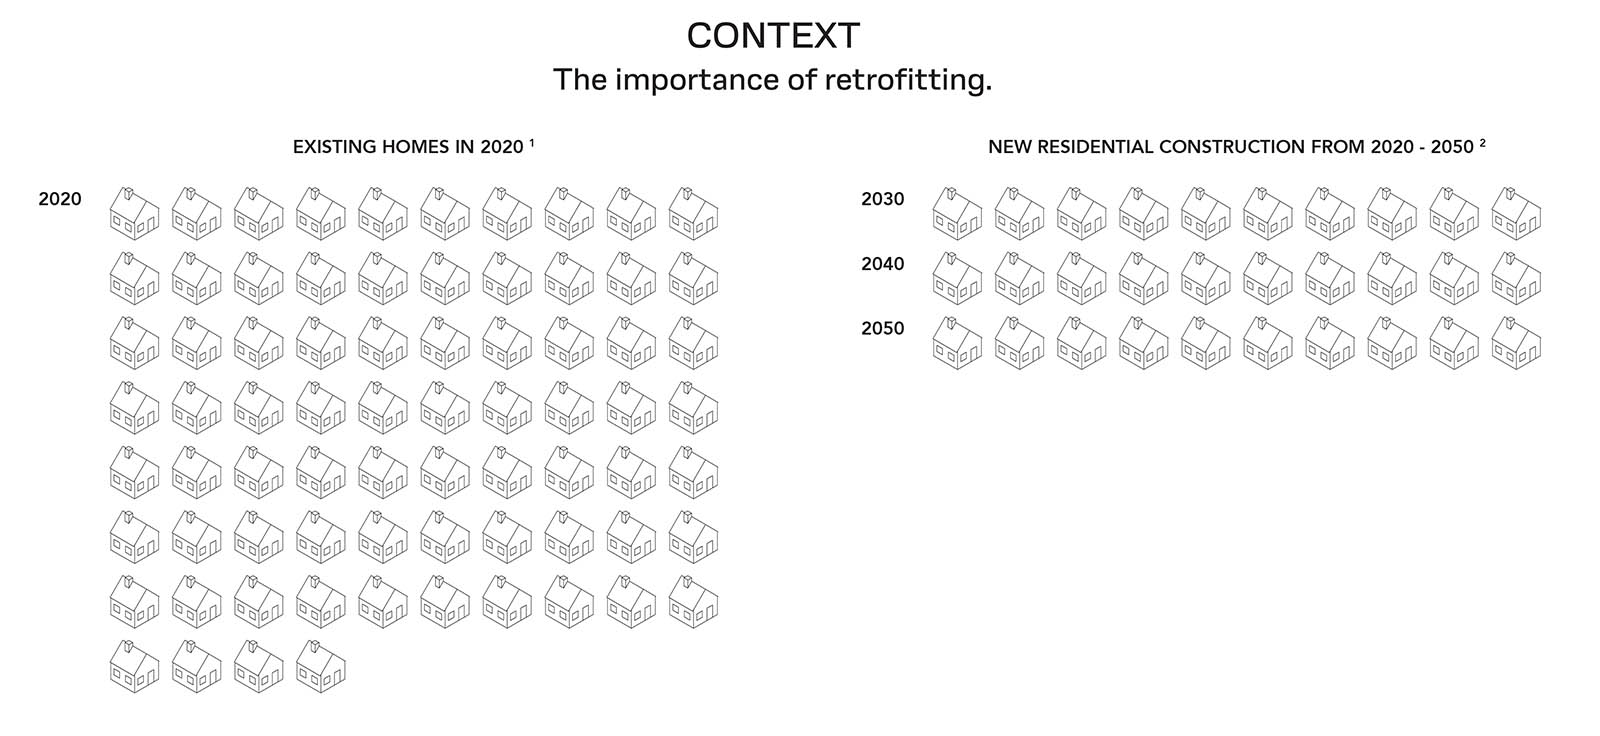 Infographic showing an existing of houses in 2020 on the left and new residential construction from 2020 to 2050 on the right